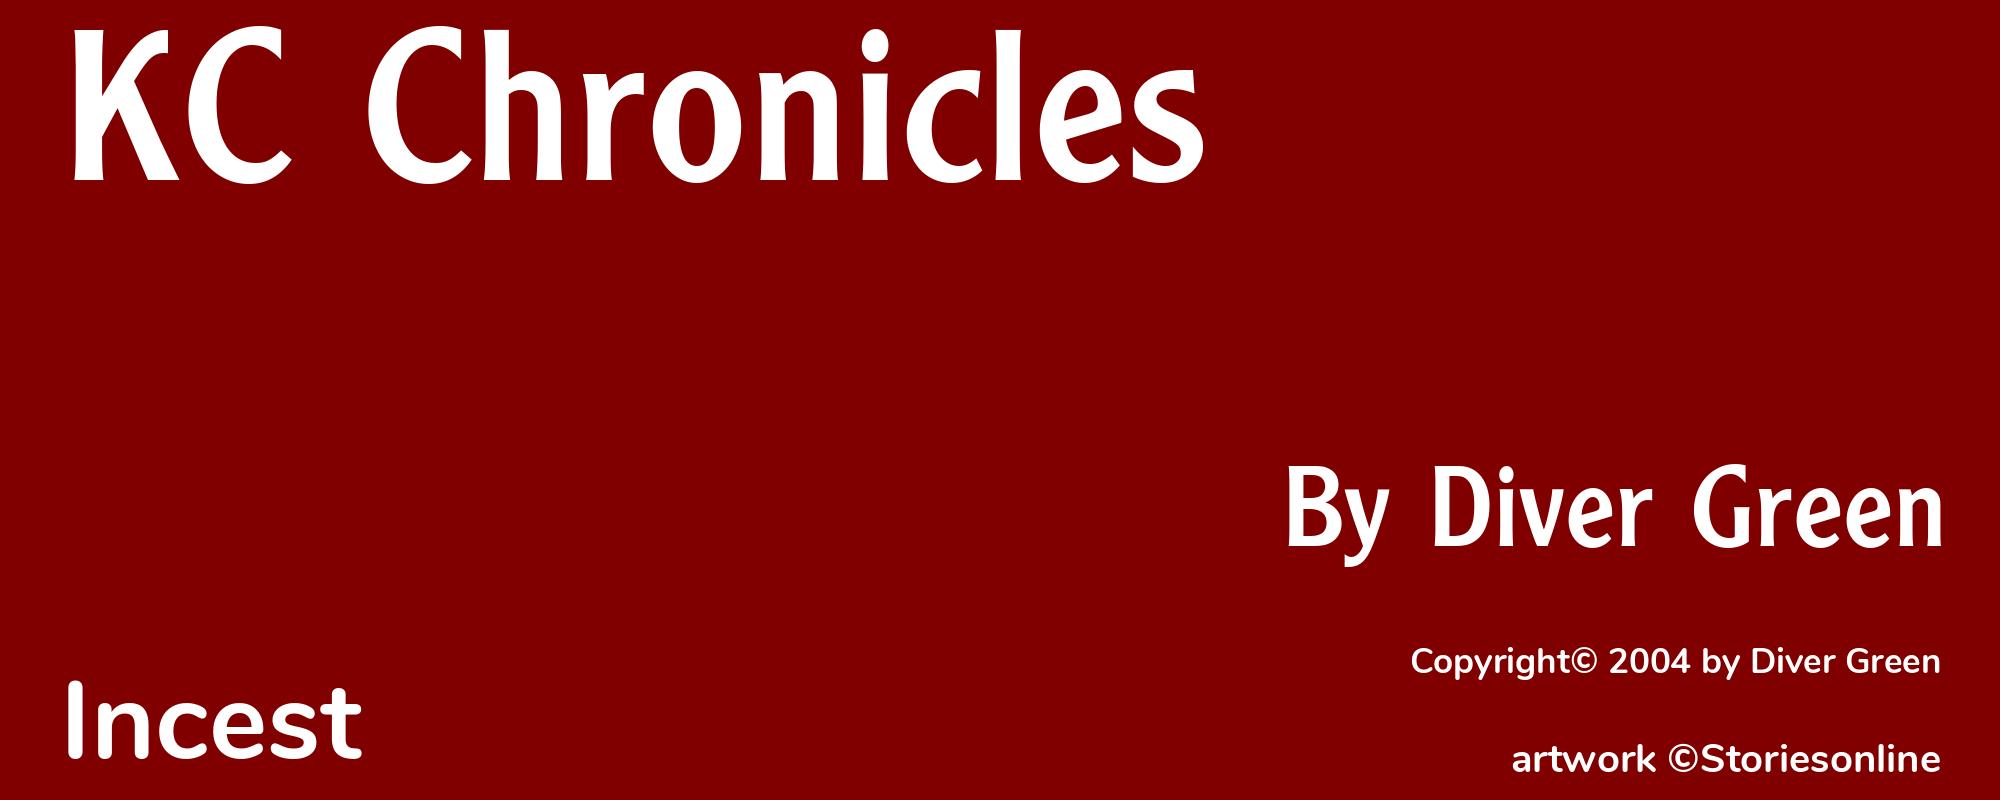 KC Chronicles - Cover